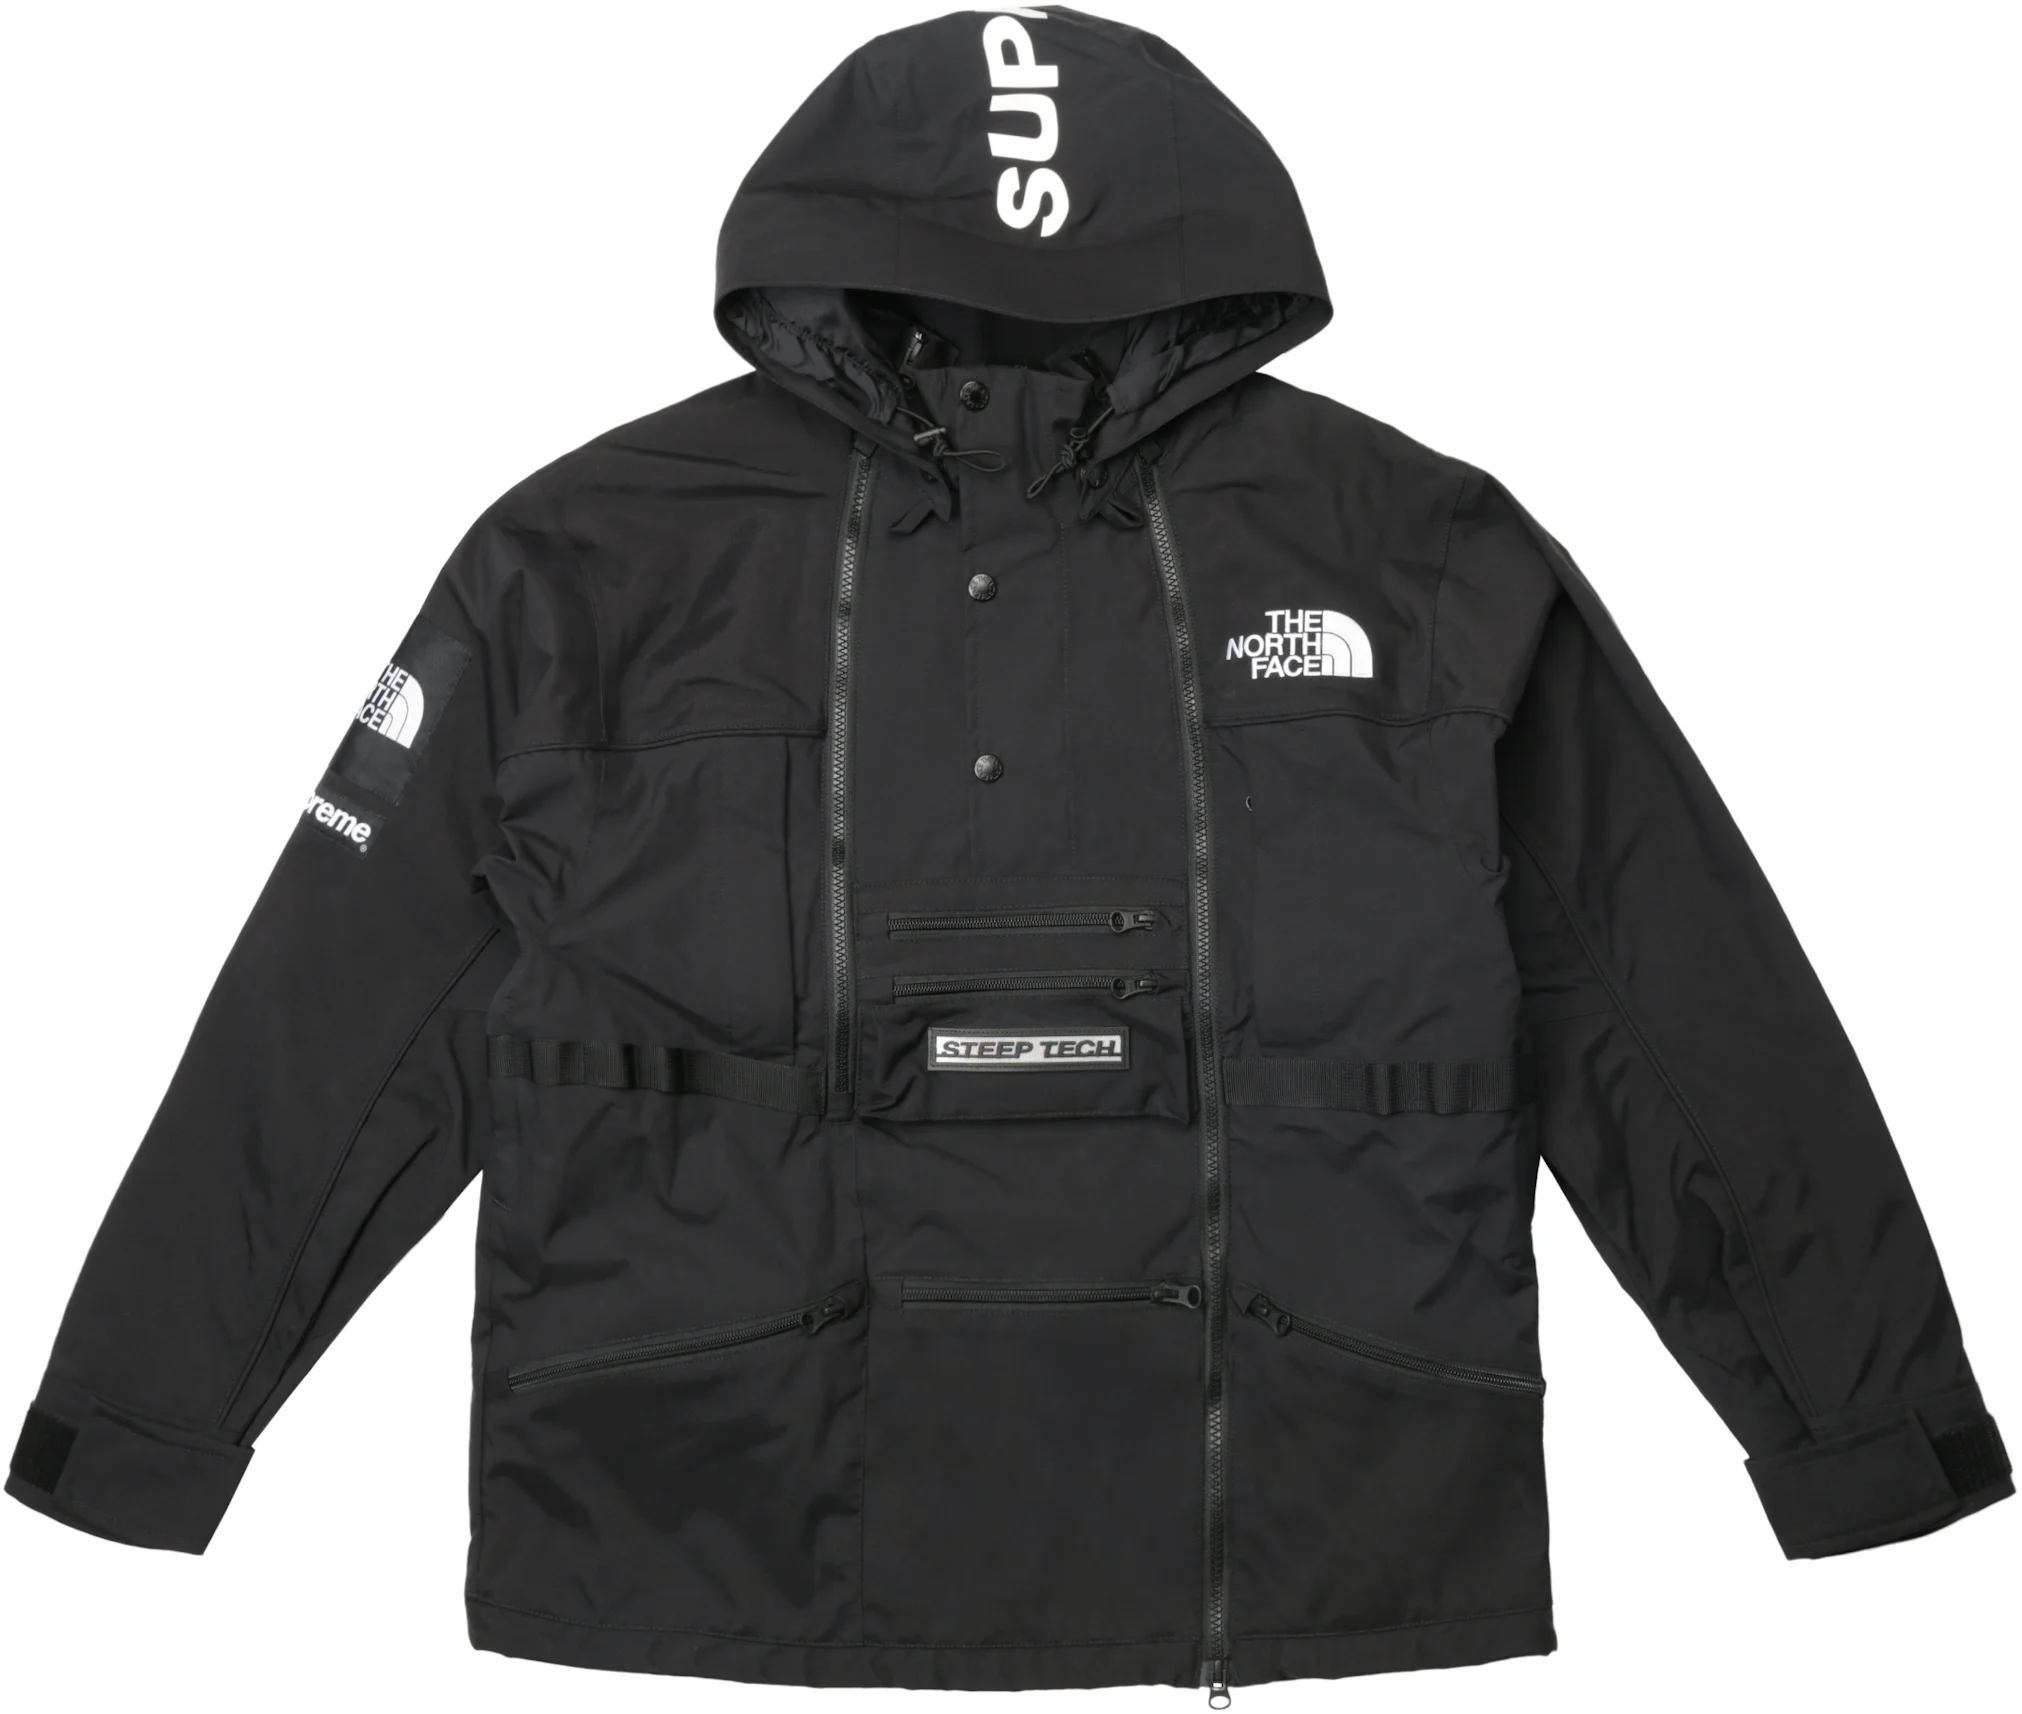 Supreme The North Face Steep Tech Hooded Jacket Black Men's - SS16 - US